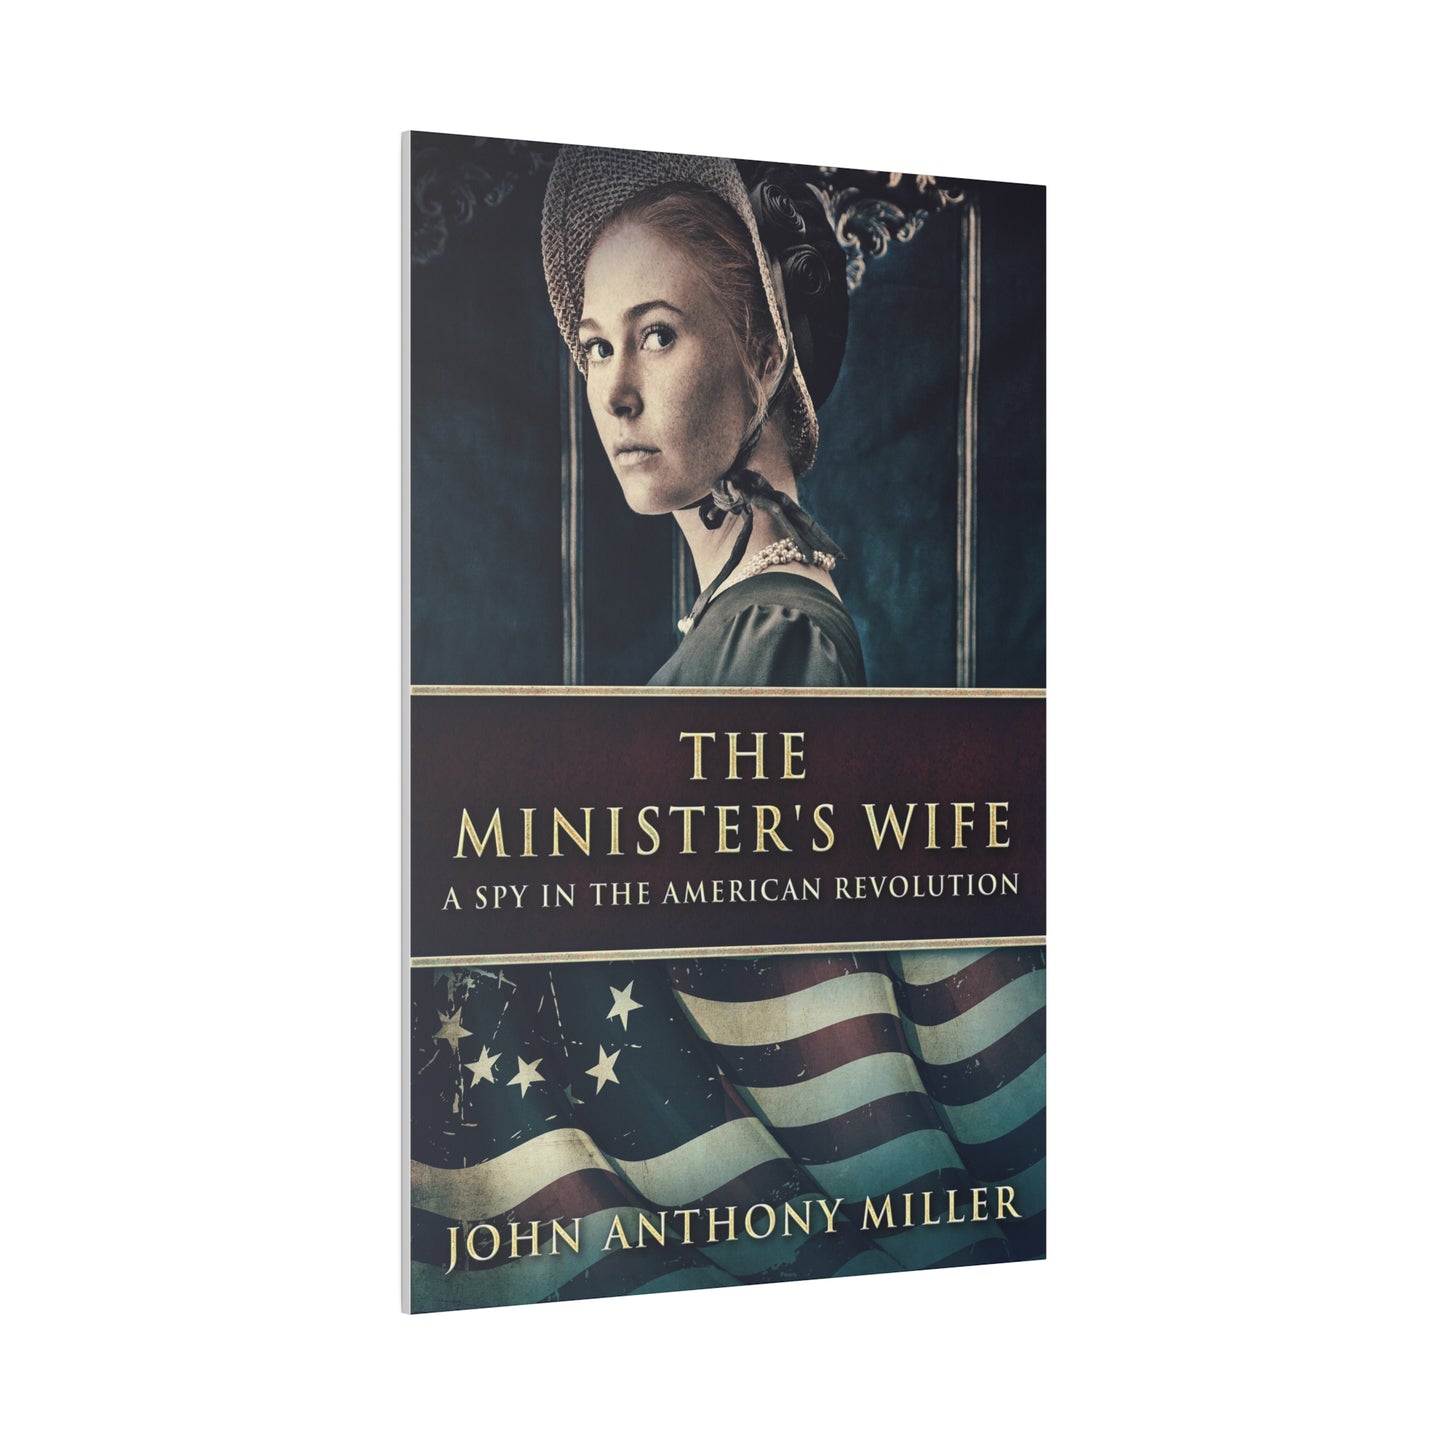 The Minister's Wife - Canvas